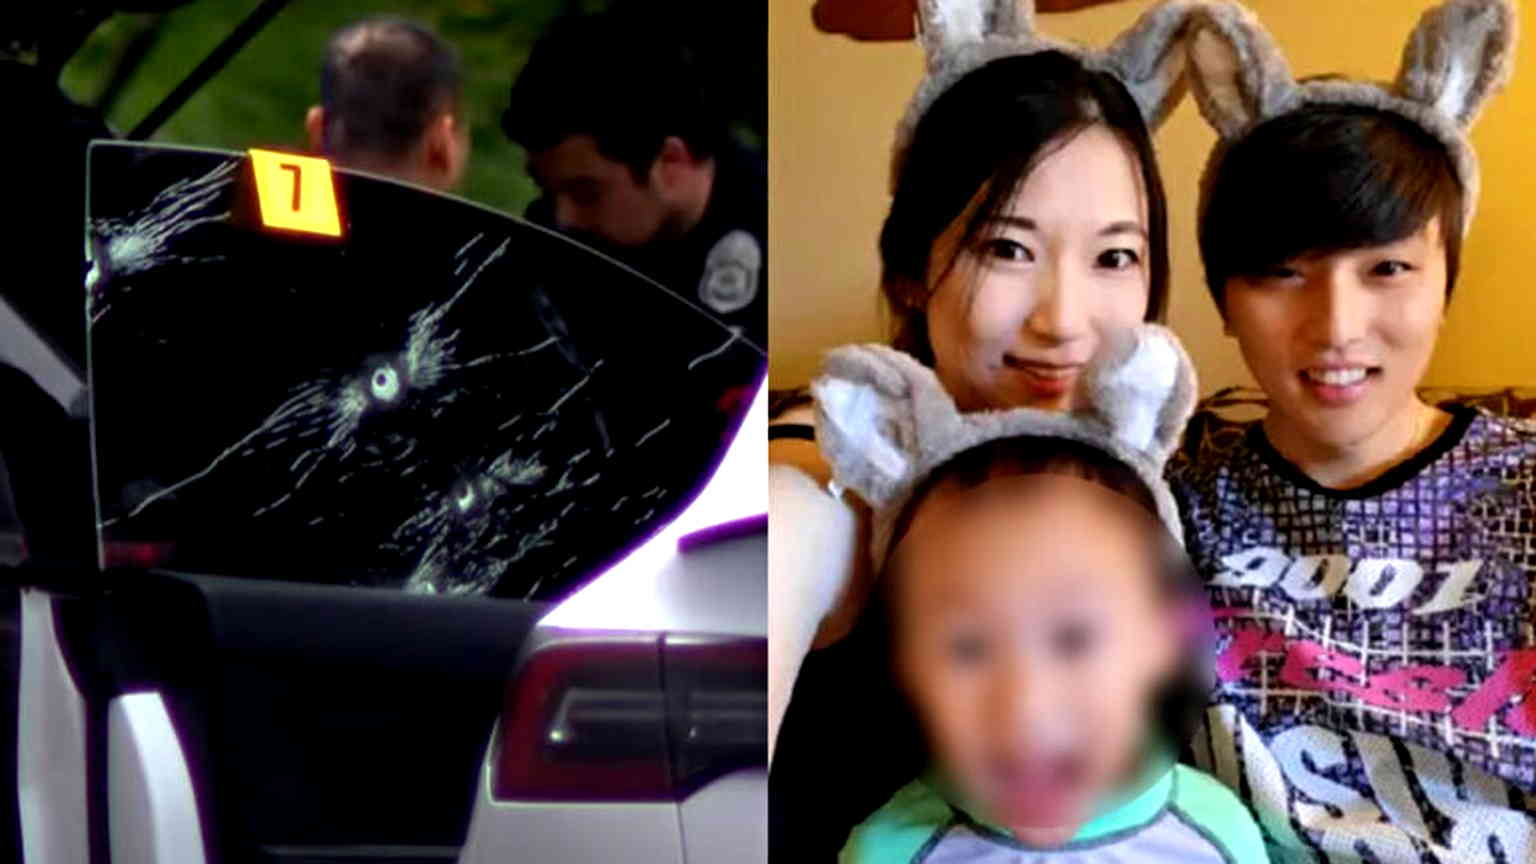 Pregnant Seattle restaurant owner shot dead by convicted felon in unprovoked attack